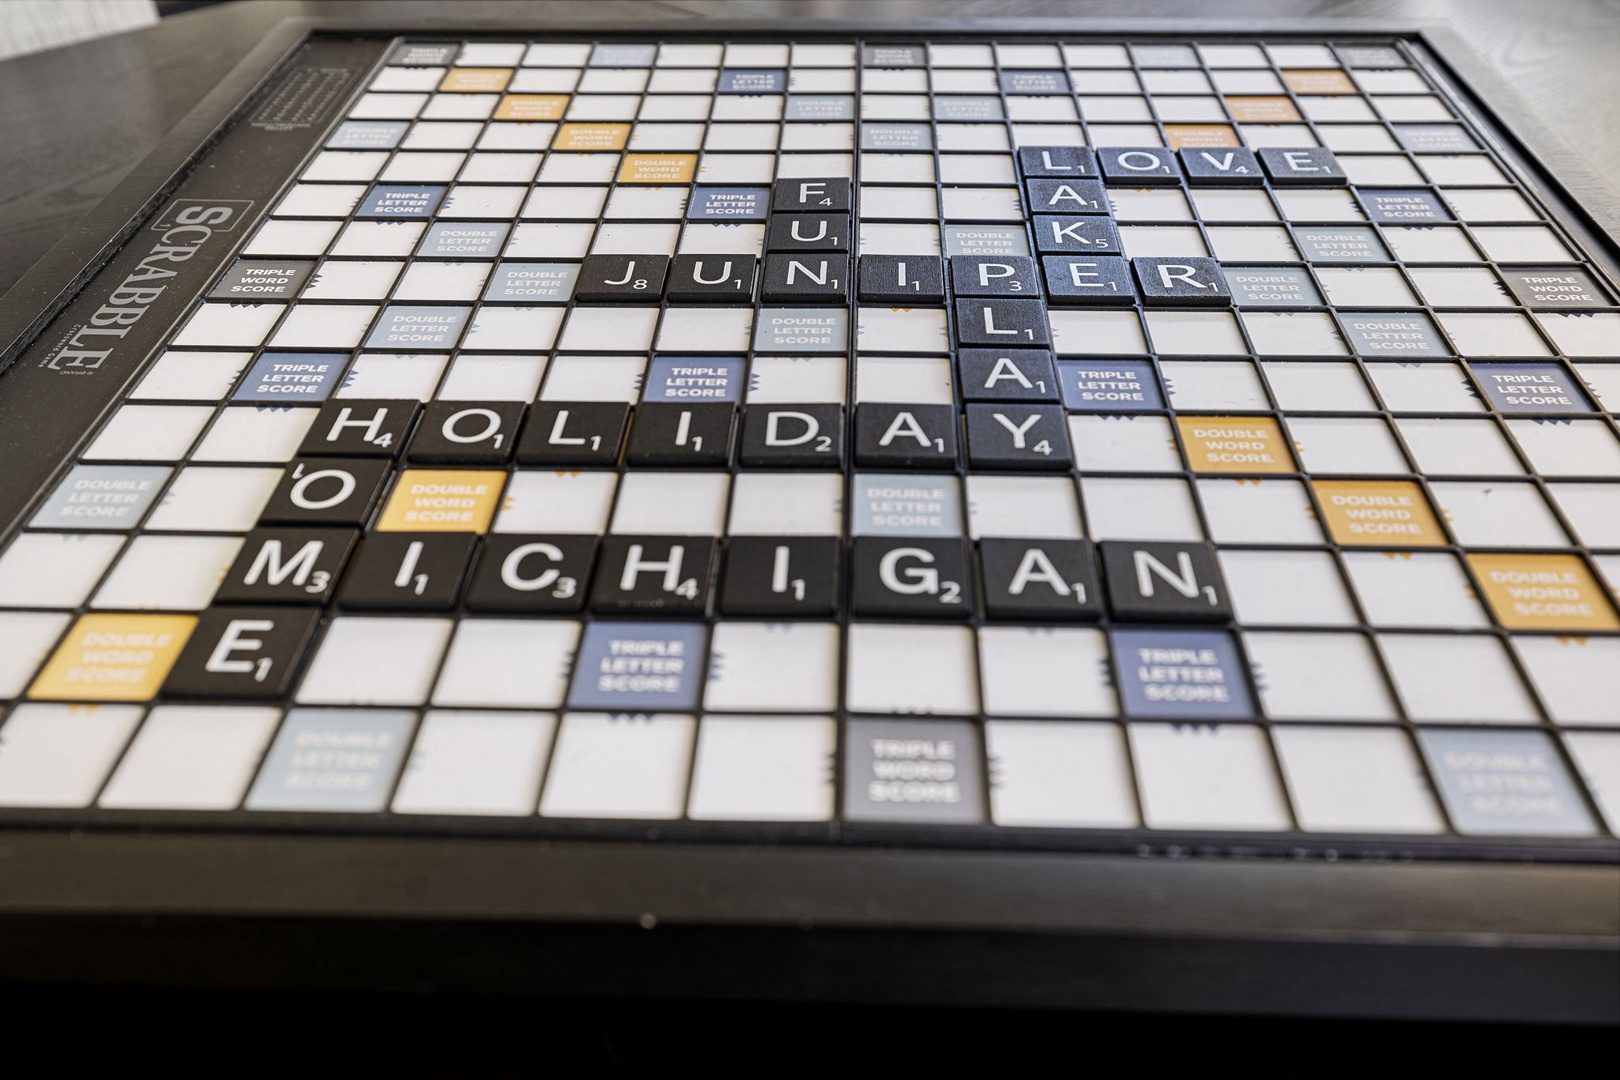 A game of Scrabble is just one of countless ways to relax during your vacation.